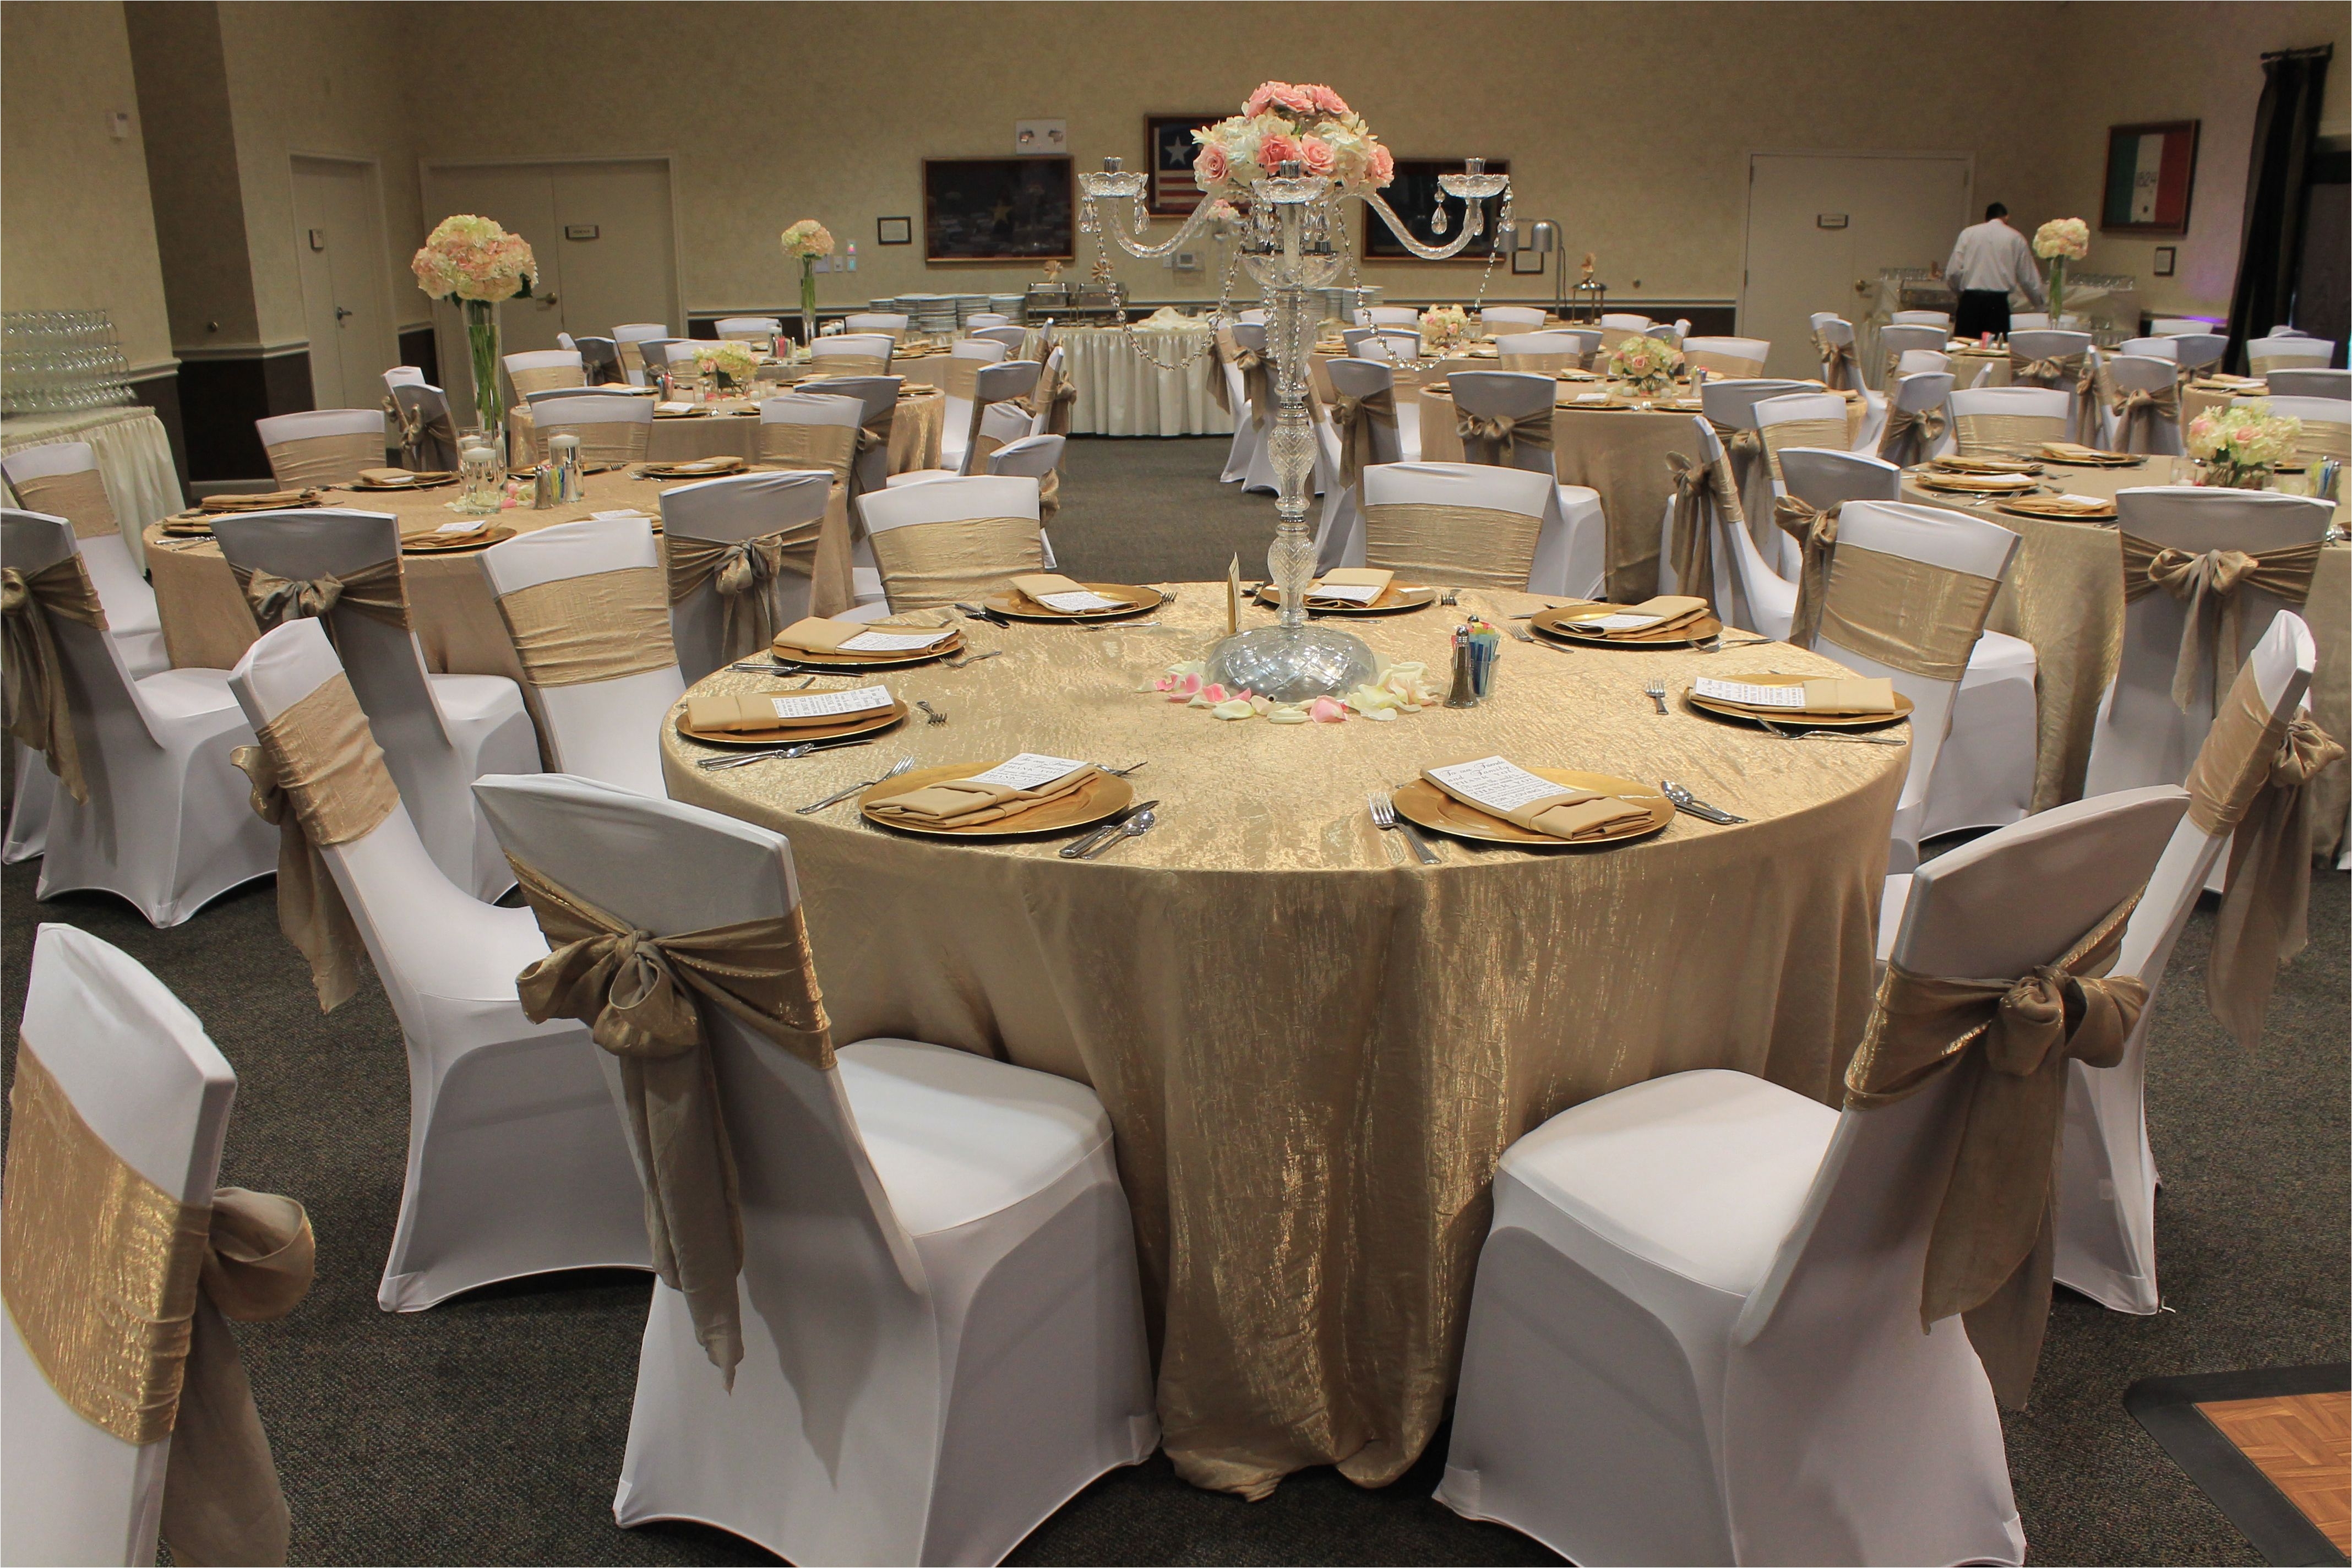 am linen rental offers affordable linen tablecloth rentals and chair cover rentals for weddings corporate meetings and other events in dallas and fort